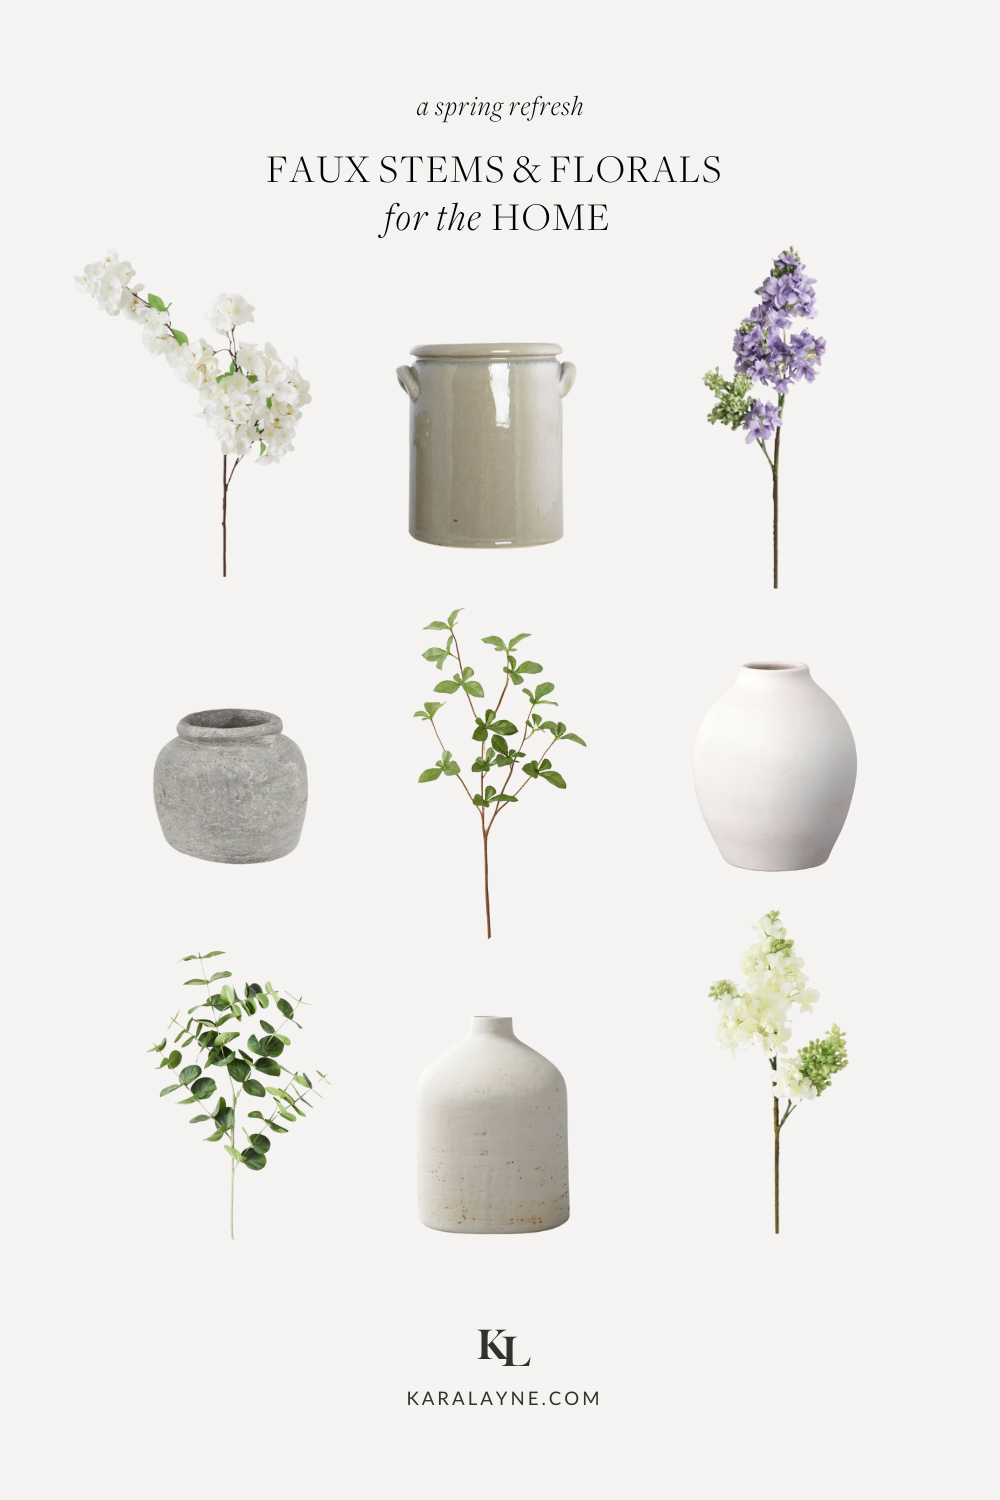 I am sharing simple spring floral inspiration and the best faux stems I have discovered. I love approaching the change of seasons in a simple way. Just a few faux spring stems or spring greens can do so much to invite the new season into your space and make things feel fresh. Catch more over on KaraLayne.com!